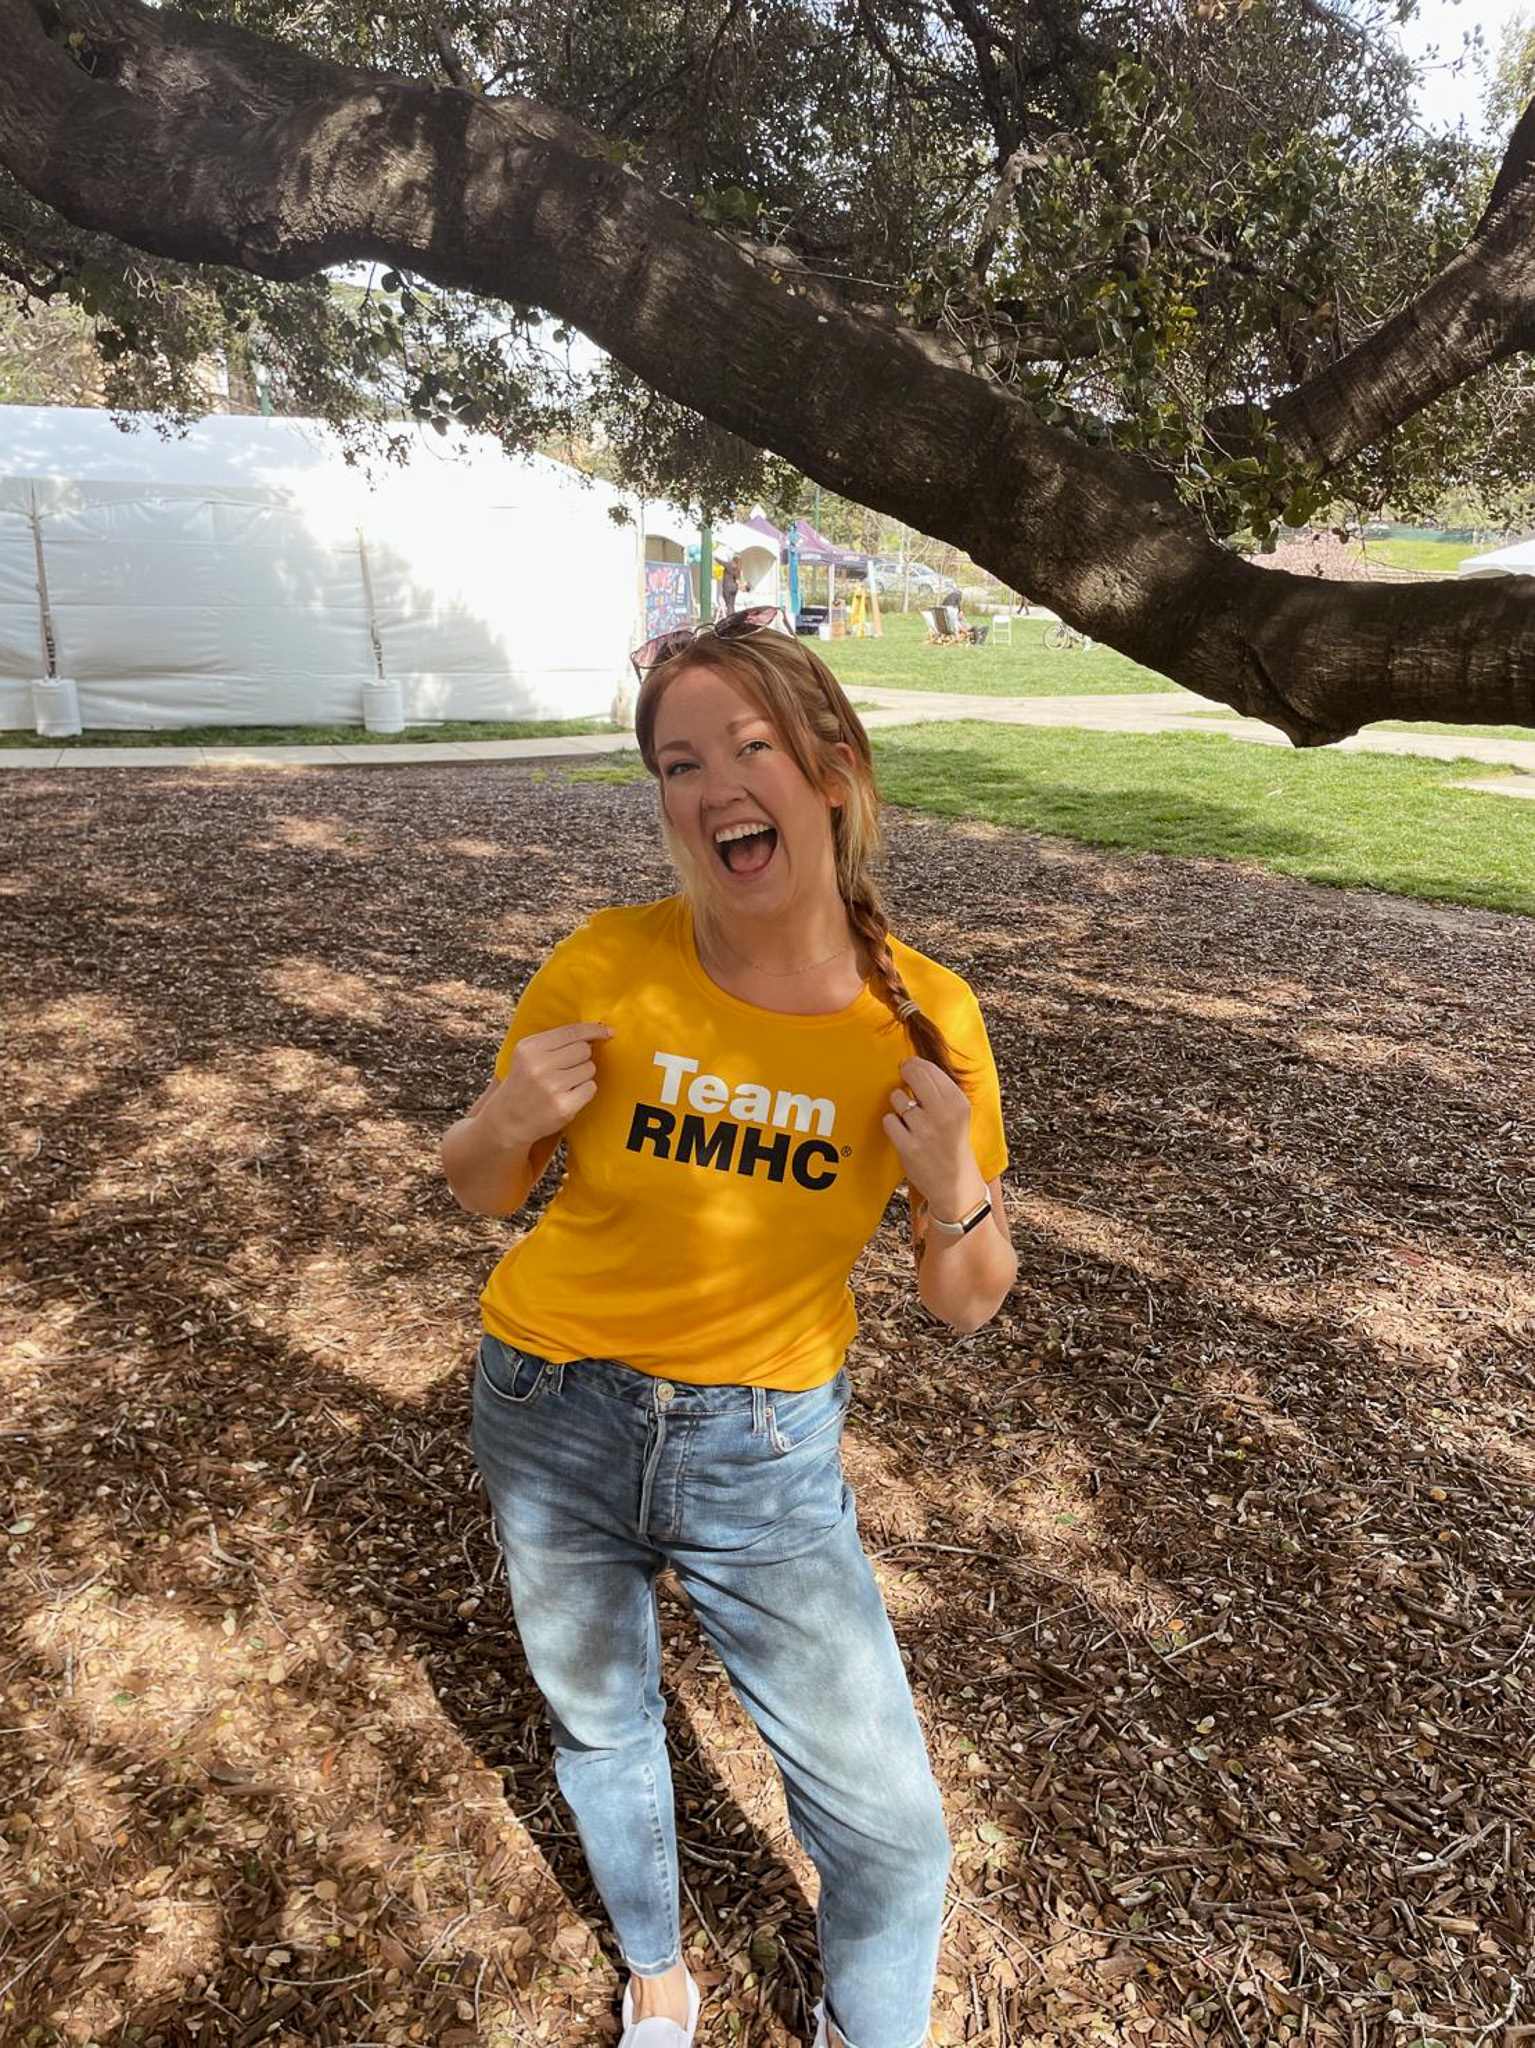 A excited person pointing at their yellow Team RMHC t-shirt.